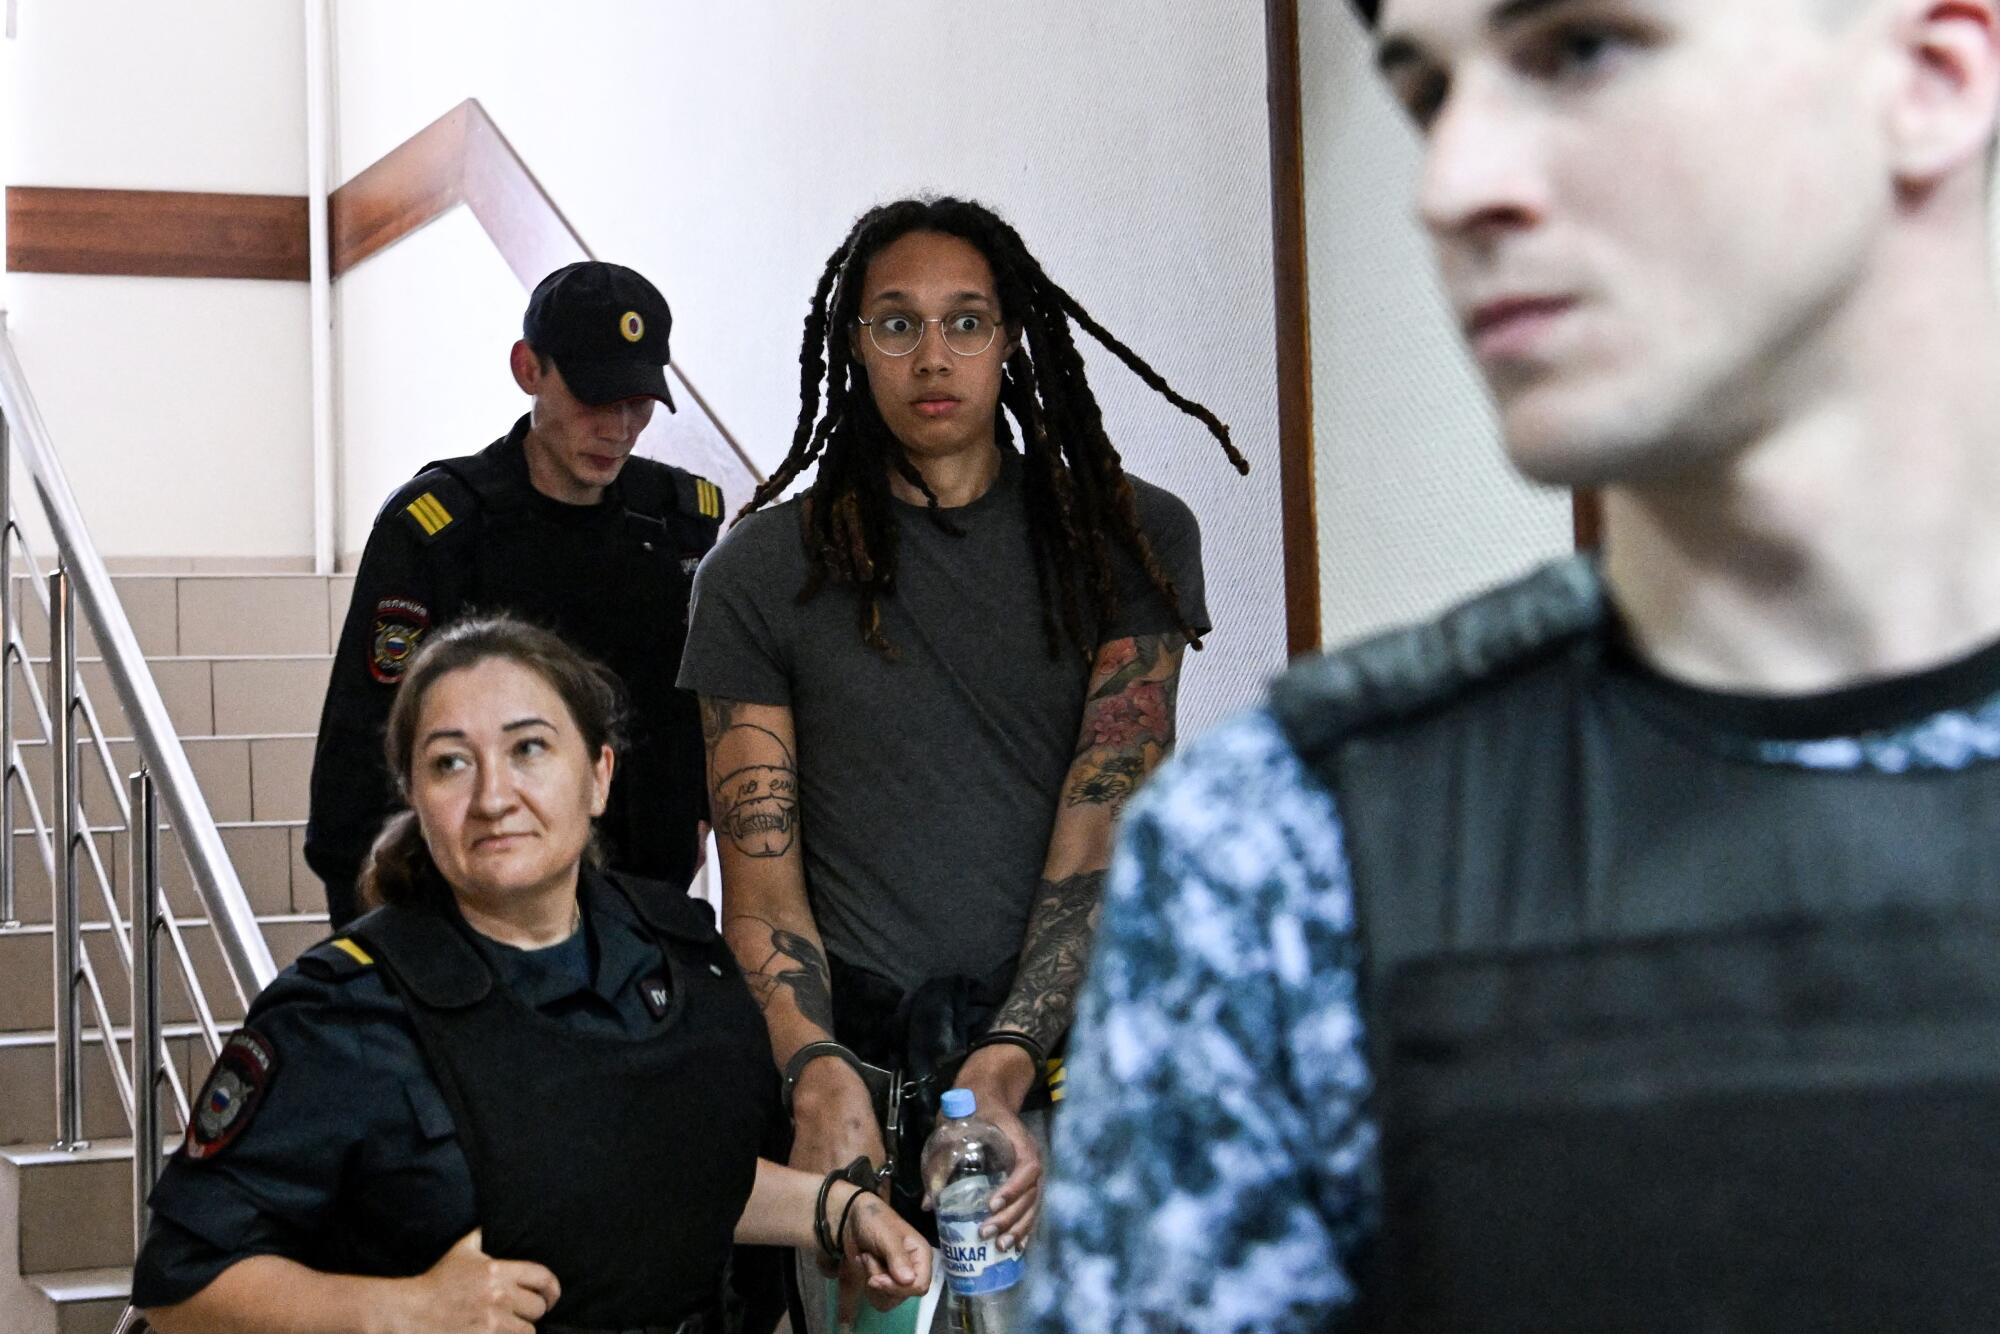 Griner, wide-eyed, in a stairwell, escorted by people in uniform.